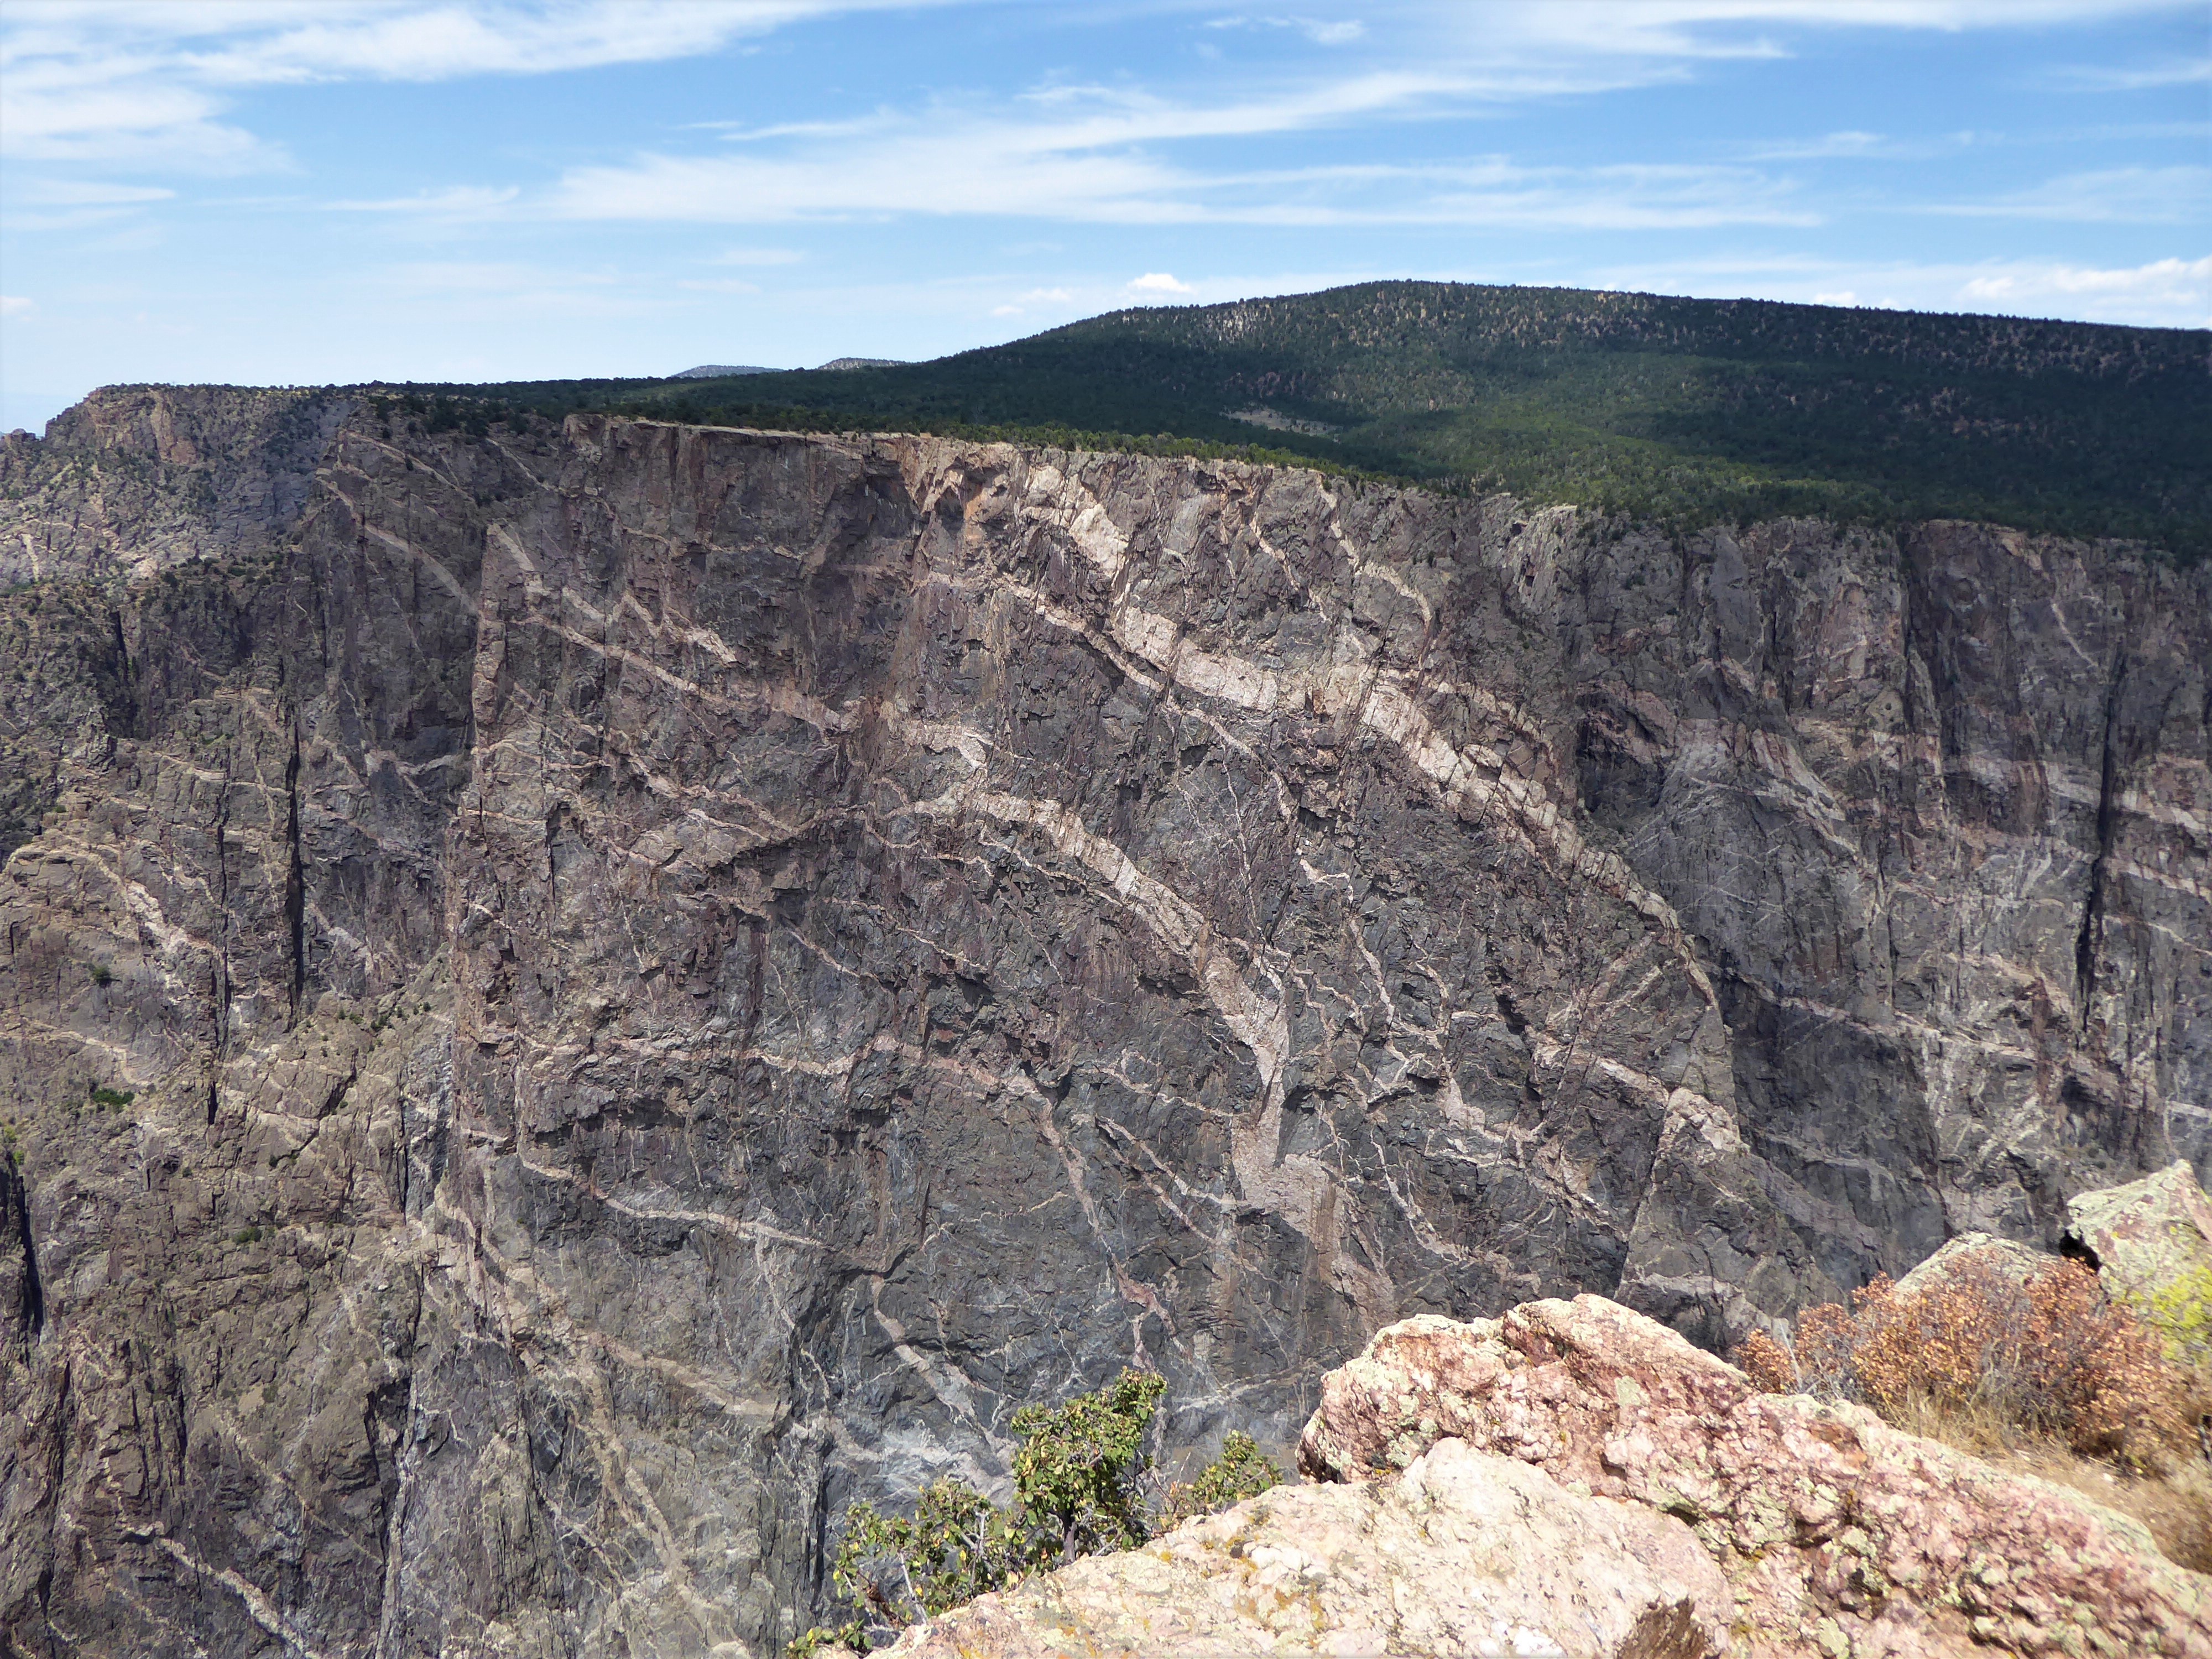 A Trip to Black Canyon of the Gunnison National Park